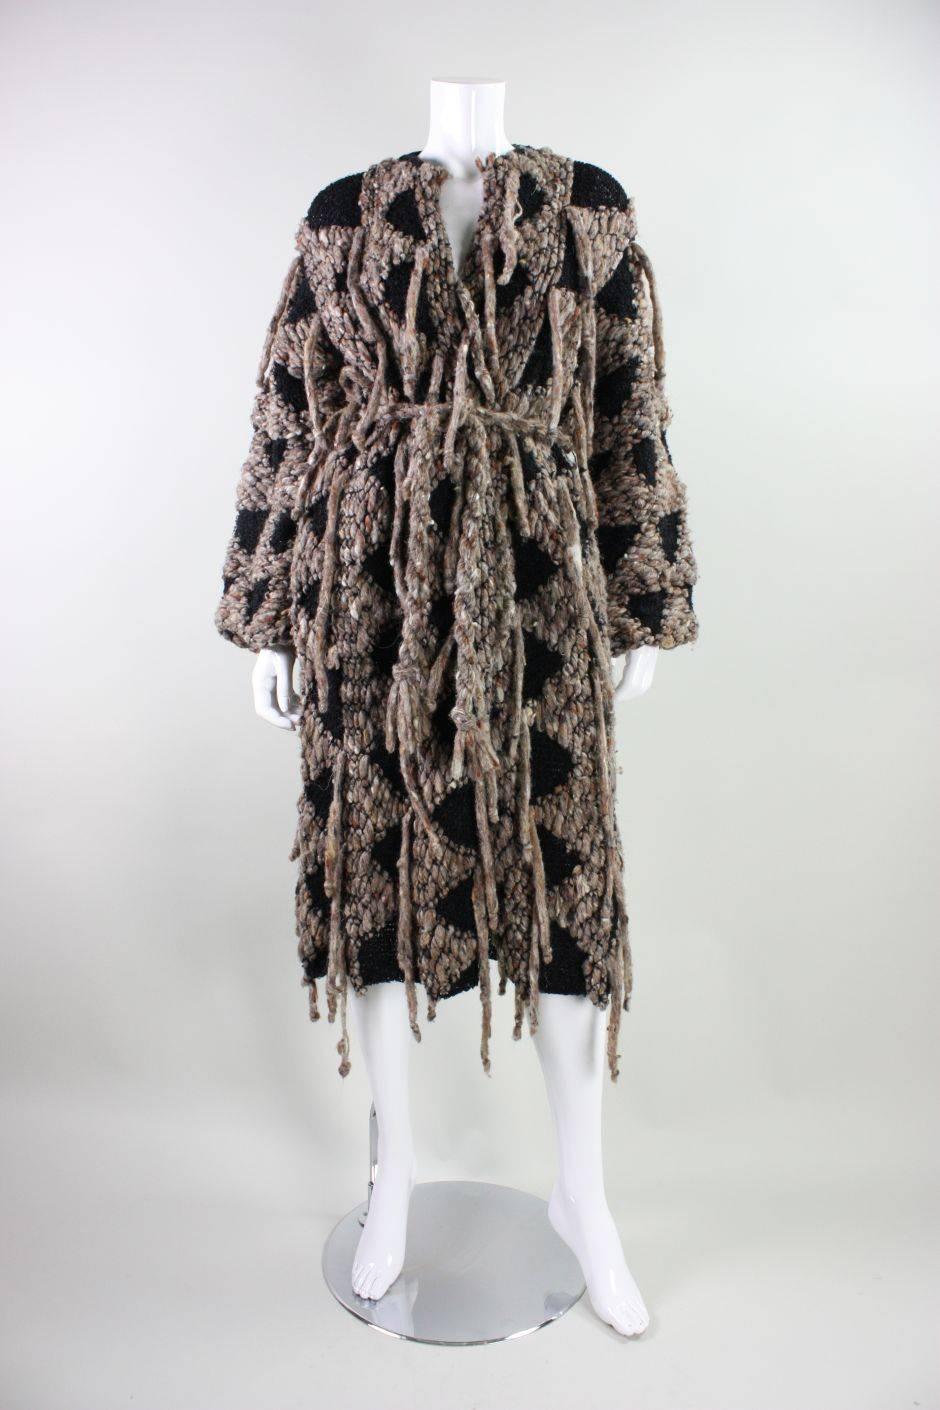 Vintage coat from Beverly Hills designer Gunn-Trigere dates to the 1980's and is made of black and brown chunky wool.  Textured knit has yarn fringe throughout.  Round neck.  Long sleeves.  Unlined.  No closures outside of a detached waist belt.